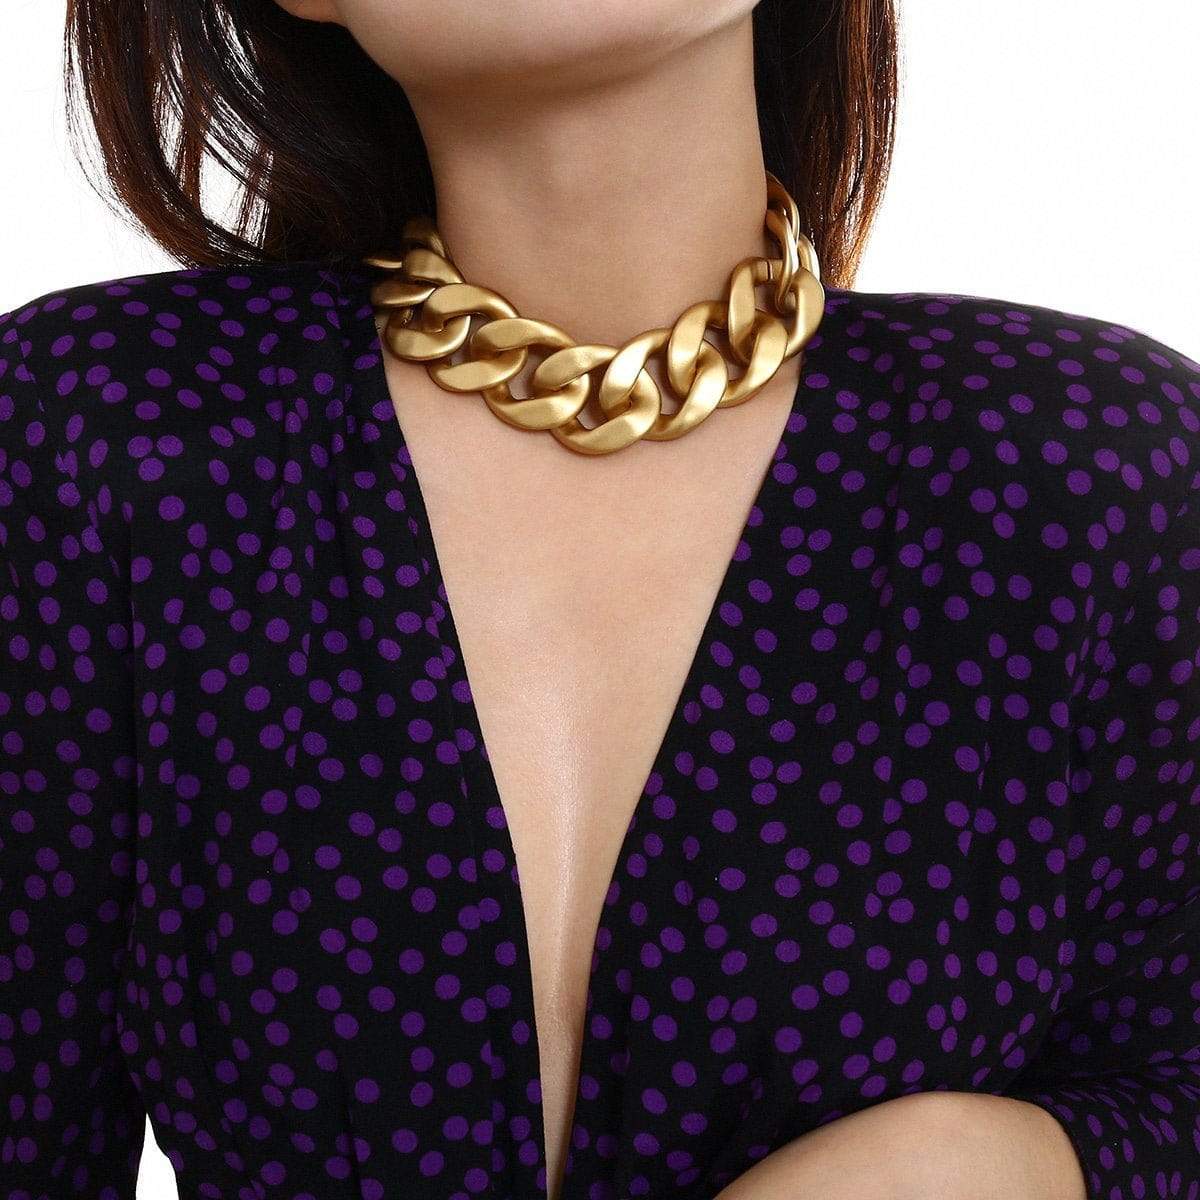 Chunky Curb Link Chain Choker Necklace - Chic Gold Tone Twisted Chain Necklace - ArtGalleryZen